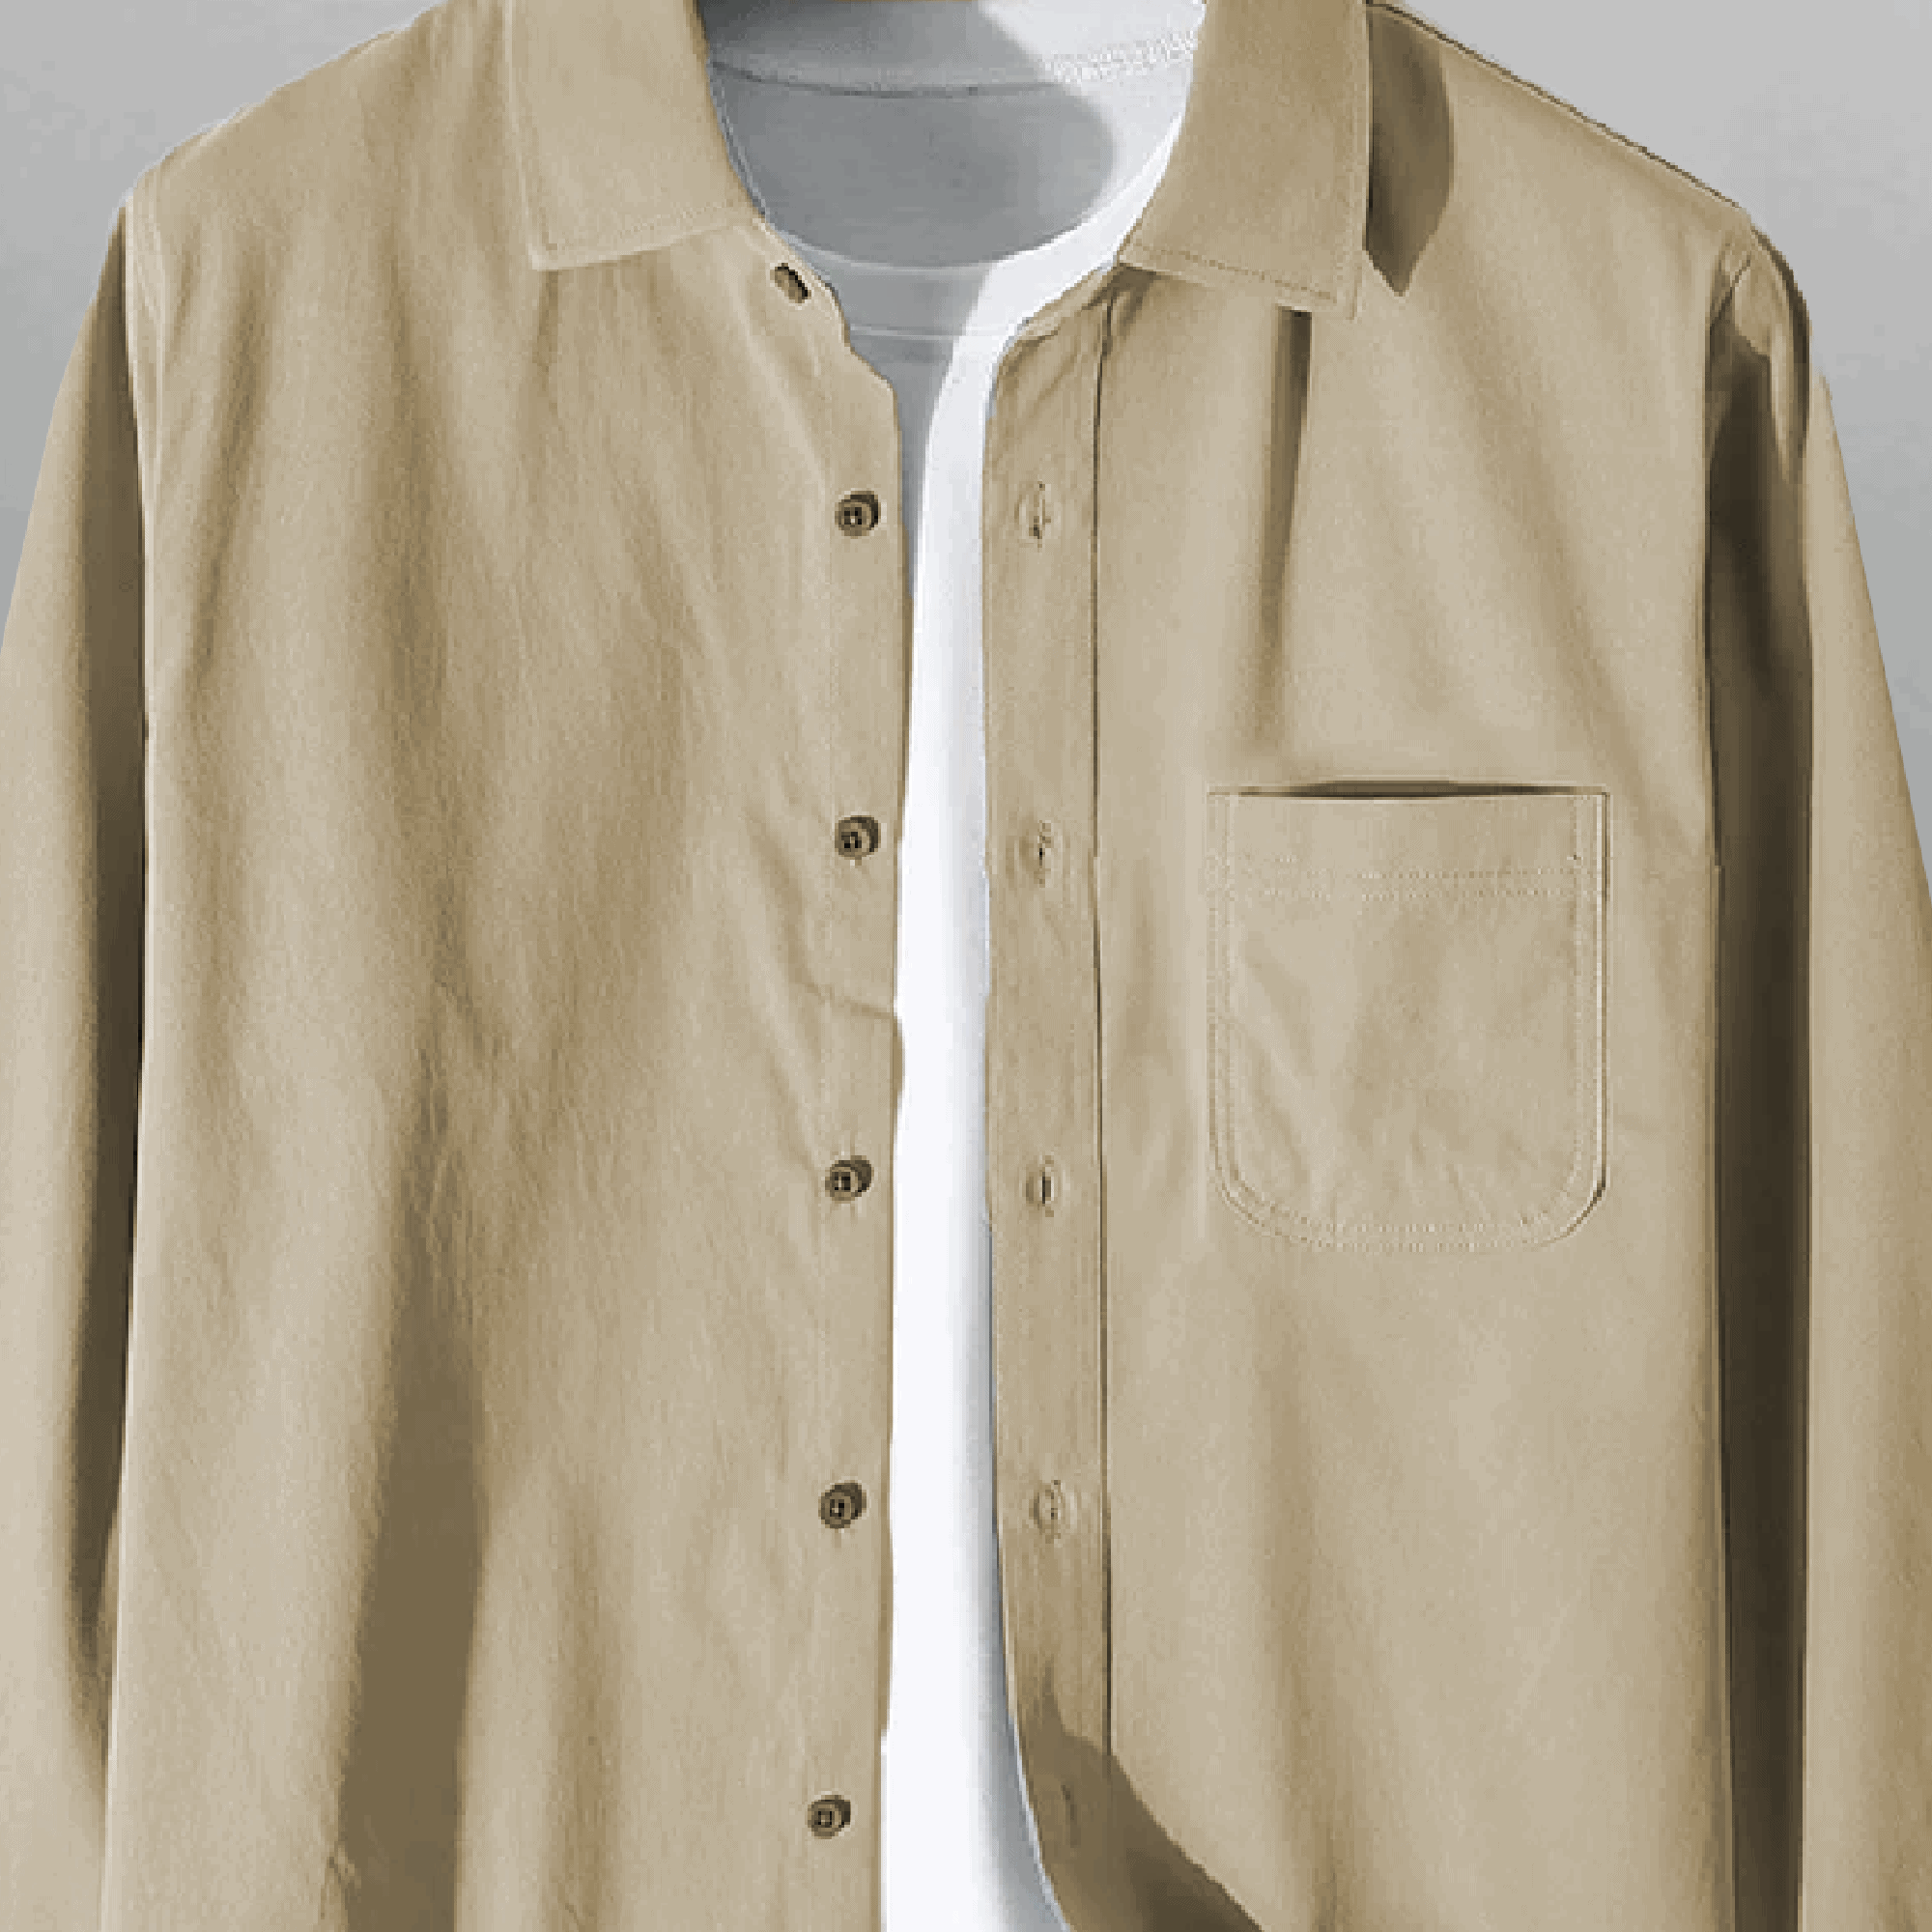 Men's Beige Corduroy collared Shirt with one side pocket and A Plain white T-shirt-RMS020